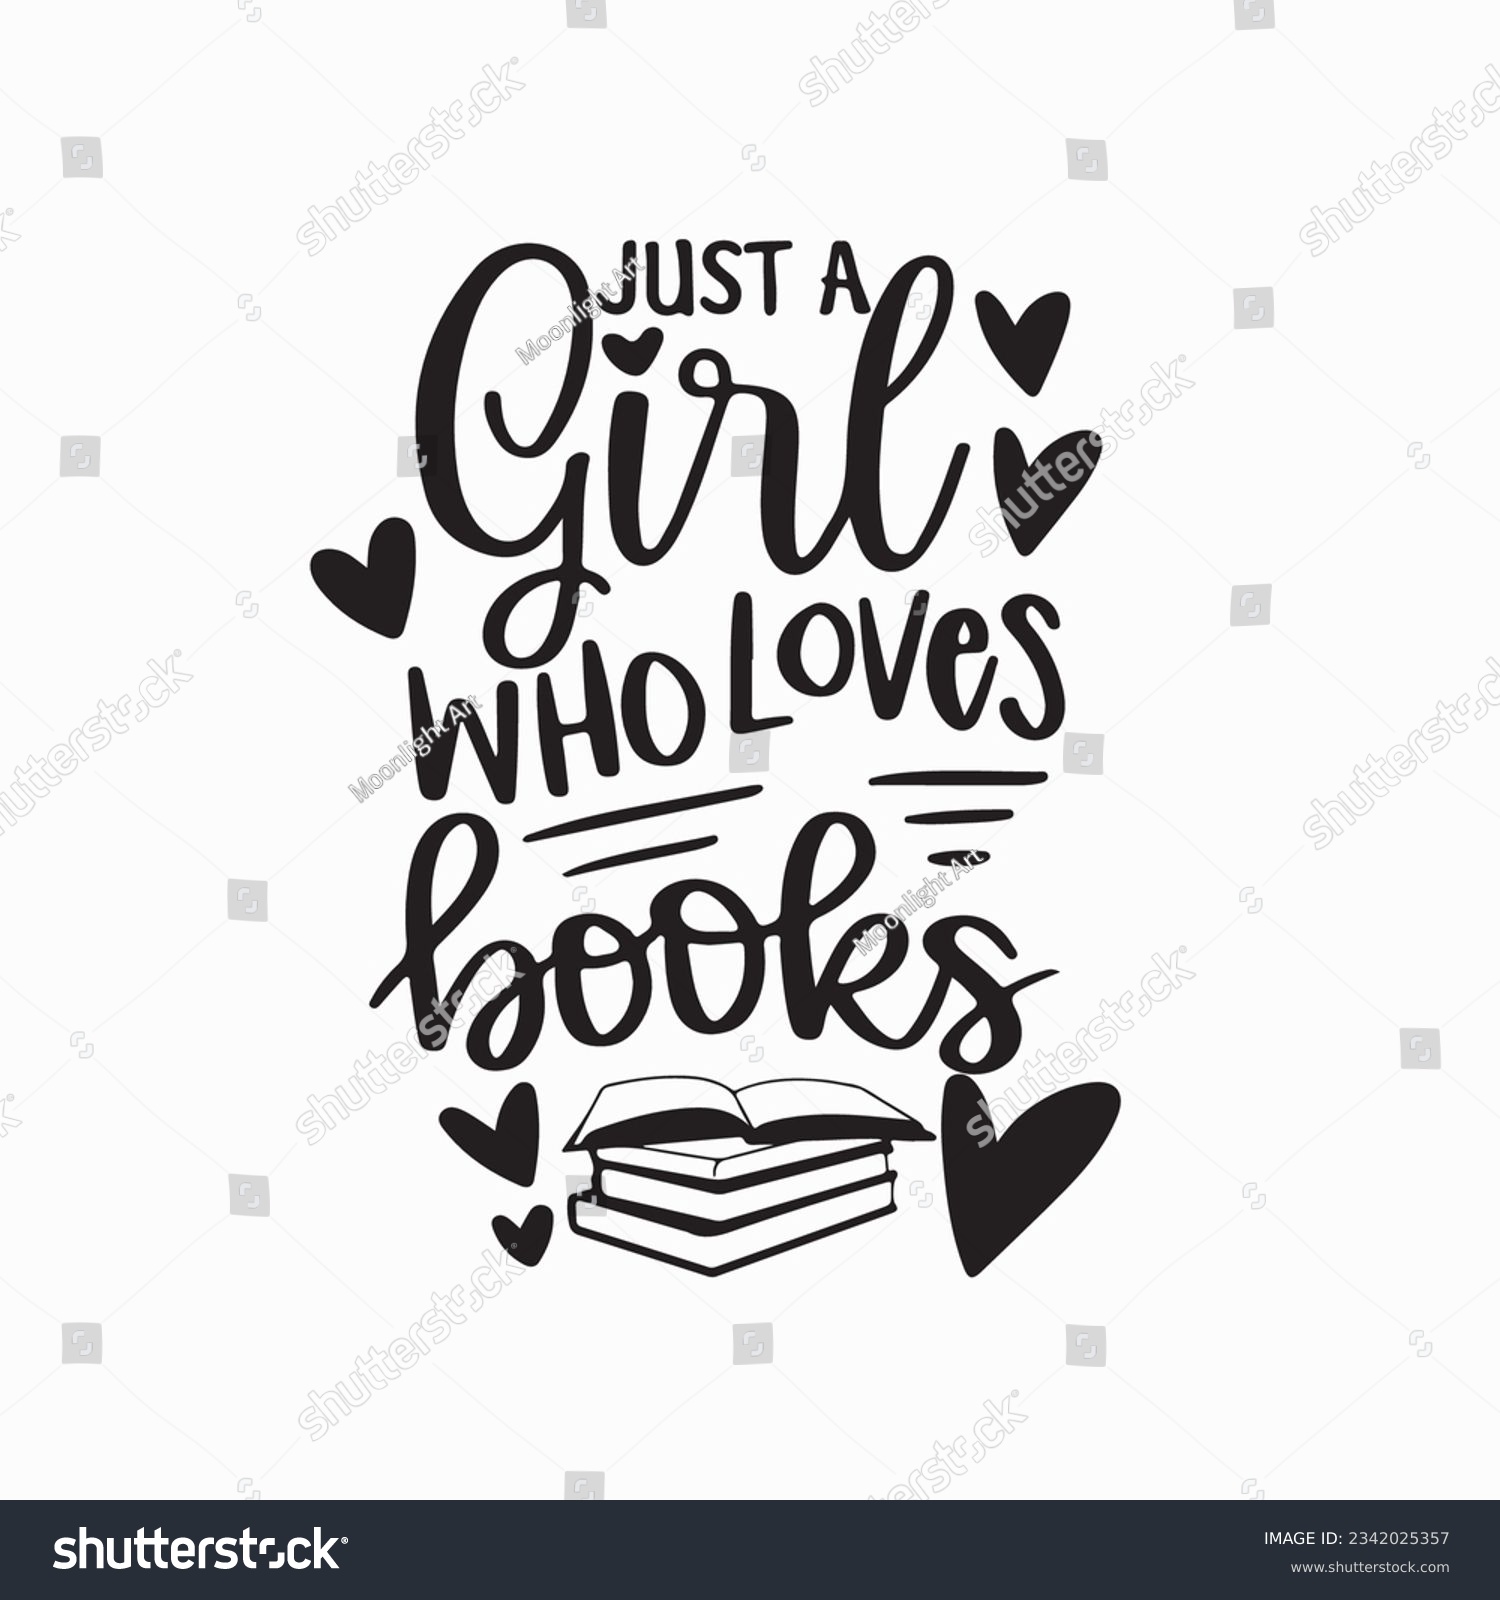 SVG of Just a Girl Who Loves Books Svg, Book Svg, Reading, Book Lover, Book Quotes, Library, Teacher, Hand-lettered, Cut File Cricut, Svg Files for Cricut svg